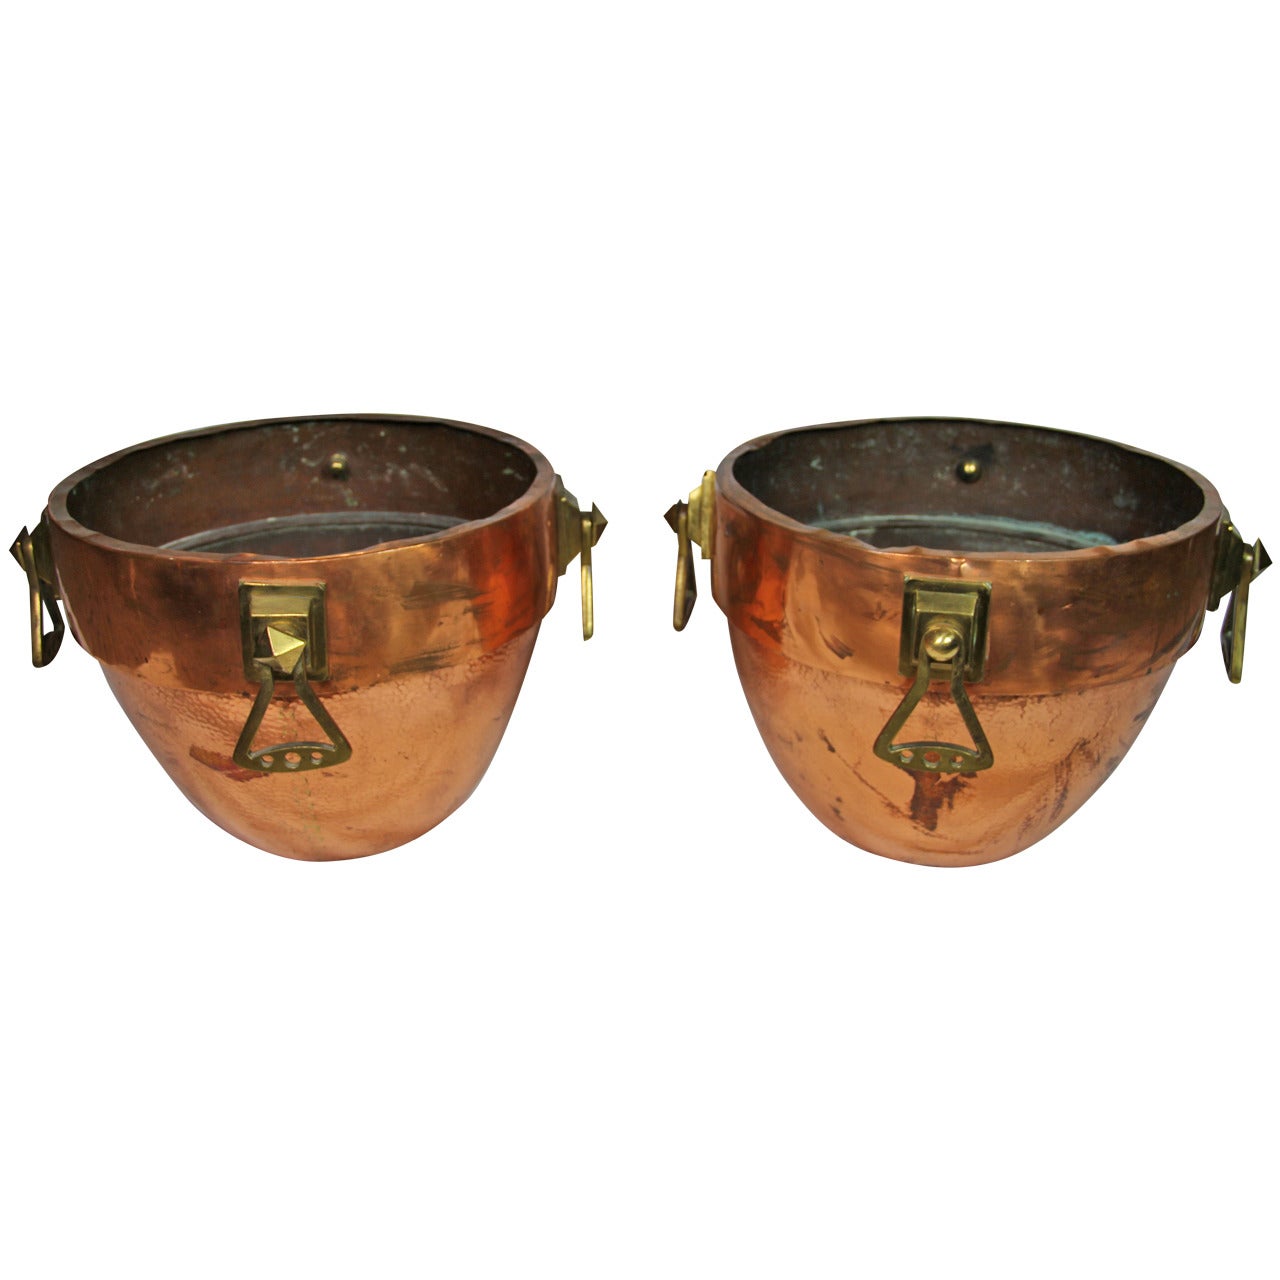 Pair of Copper and Brass Jardinieres For Sale